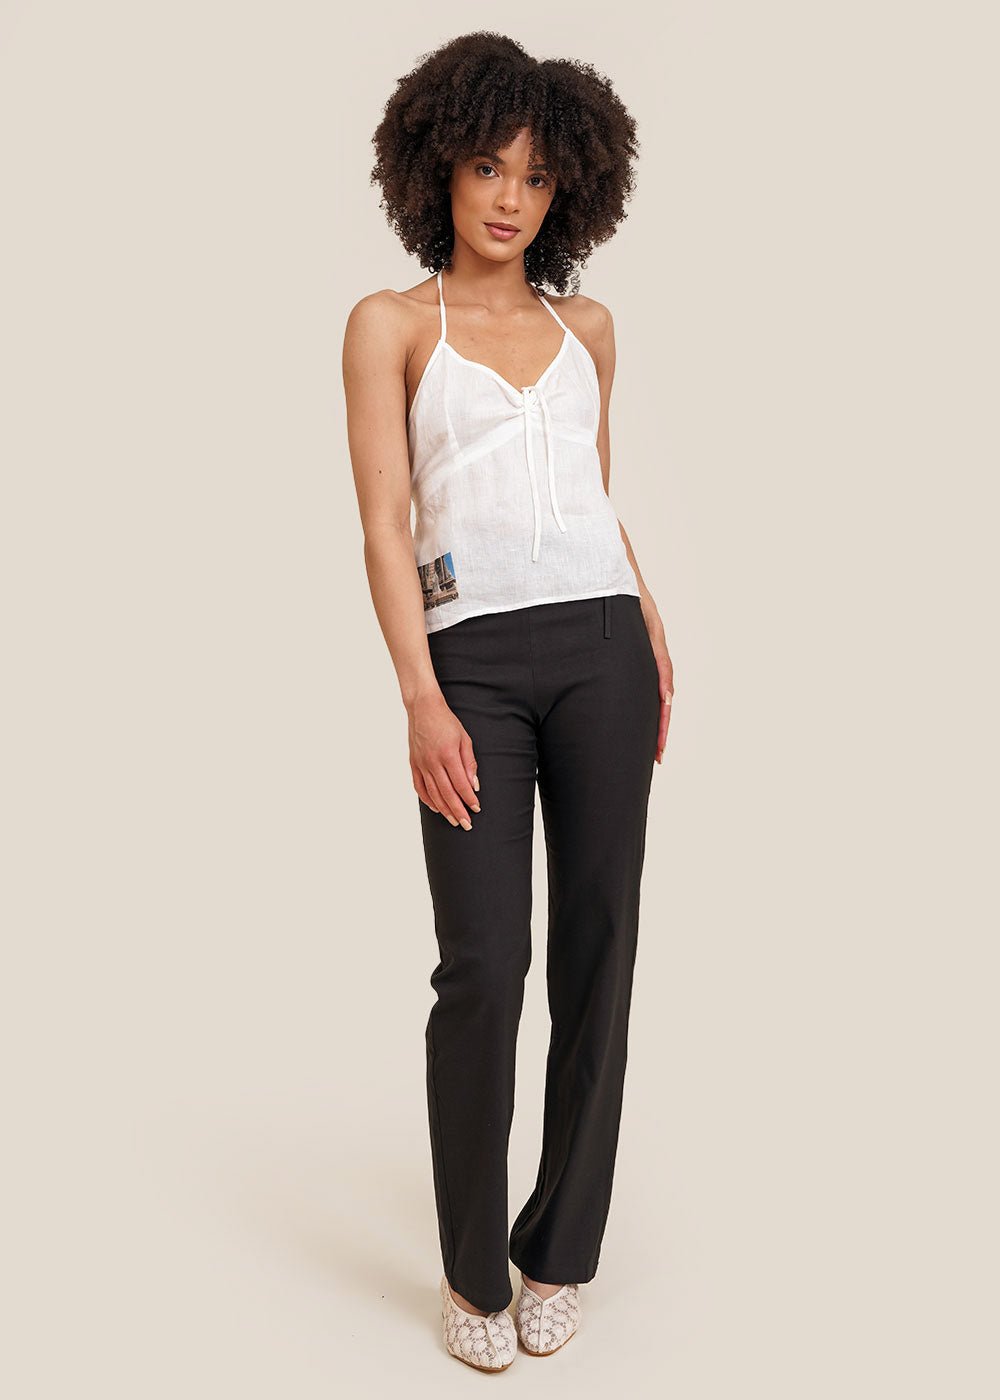 Paloma Wool Off-White Katie Top - New Classics Studios Sustainable Ethical Fashion Canada